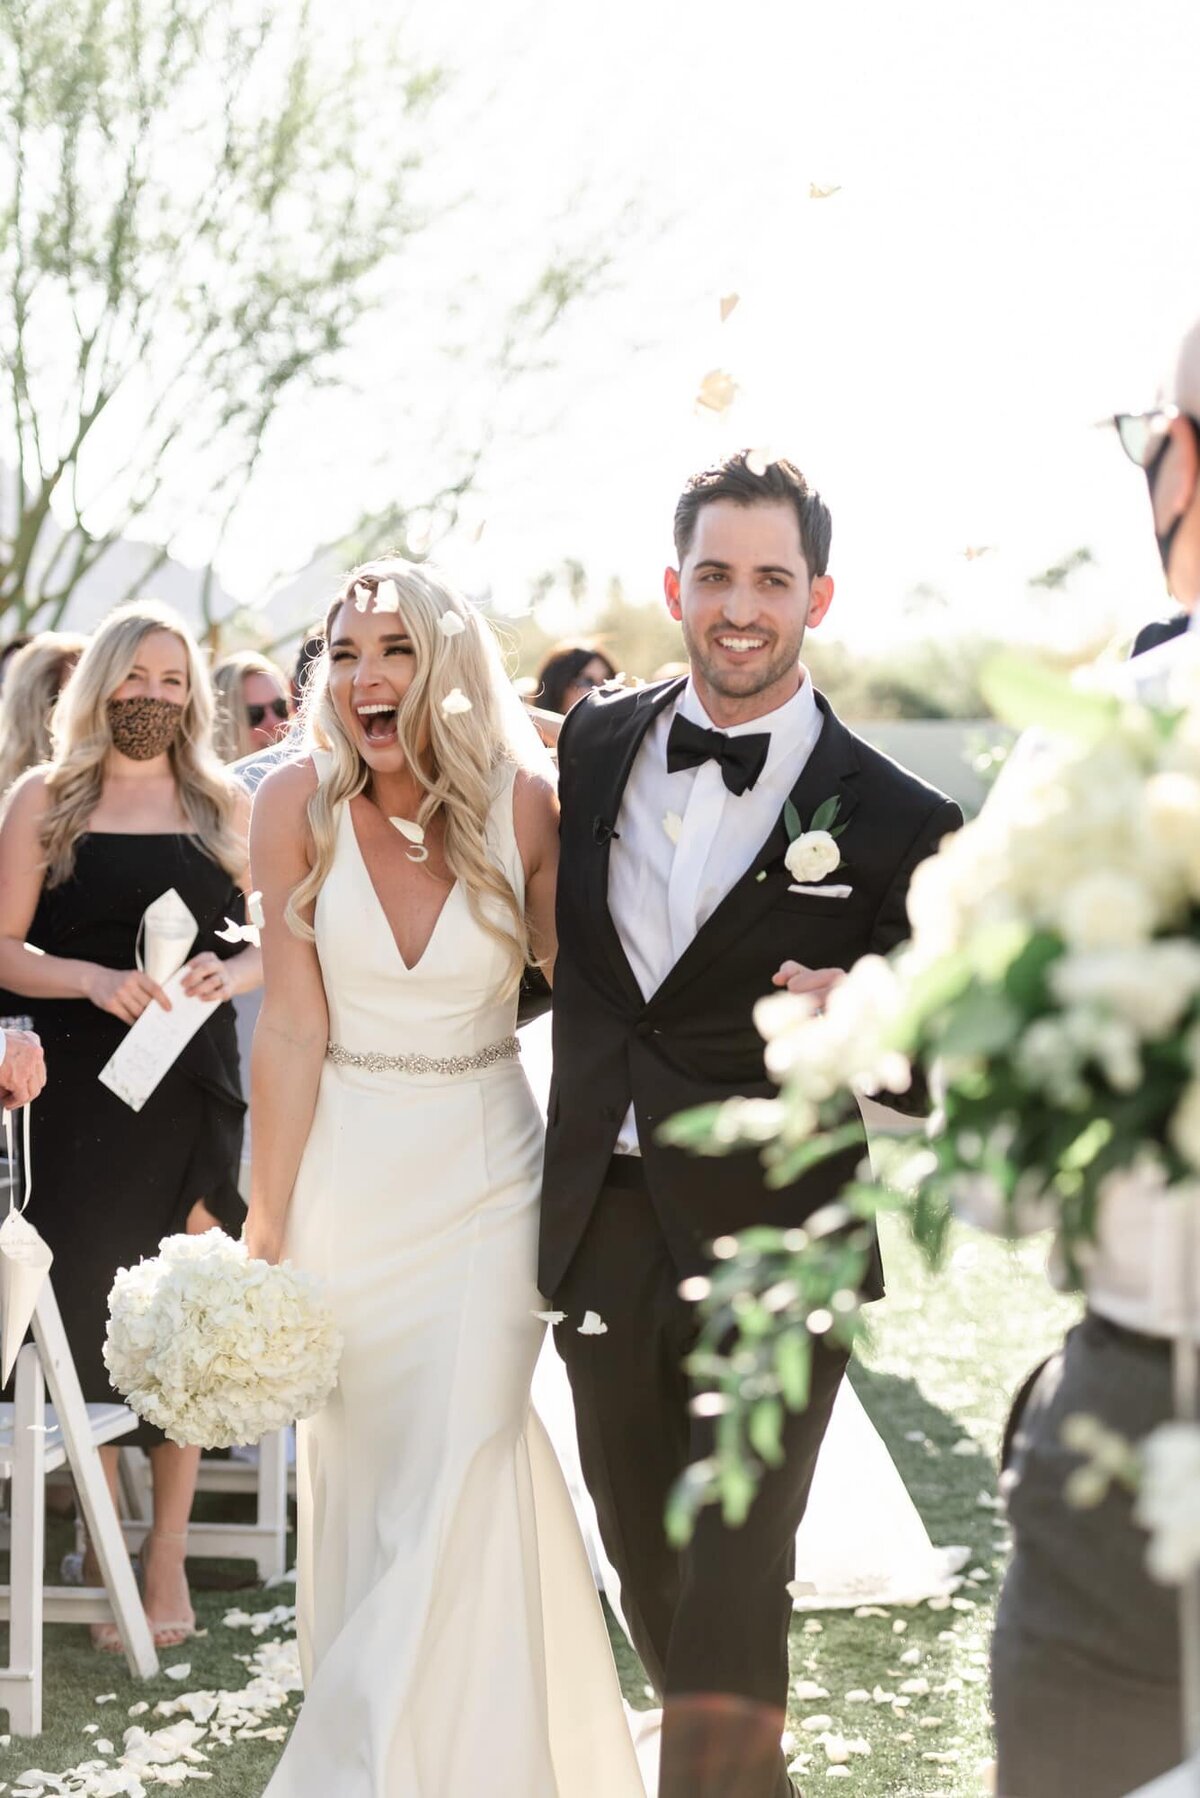 Bride excited as they walk down the recessional from ceremony at the Andaz Resort Scottsdale